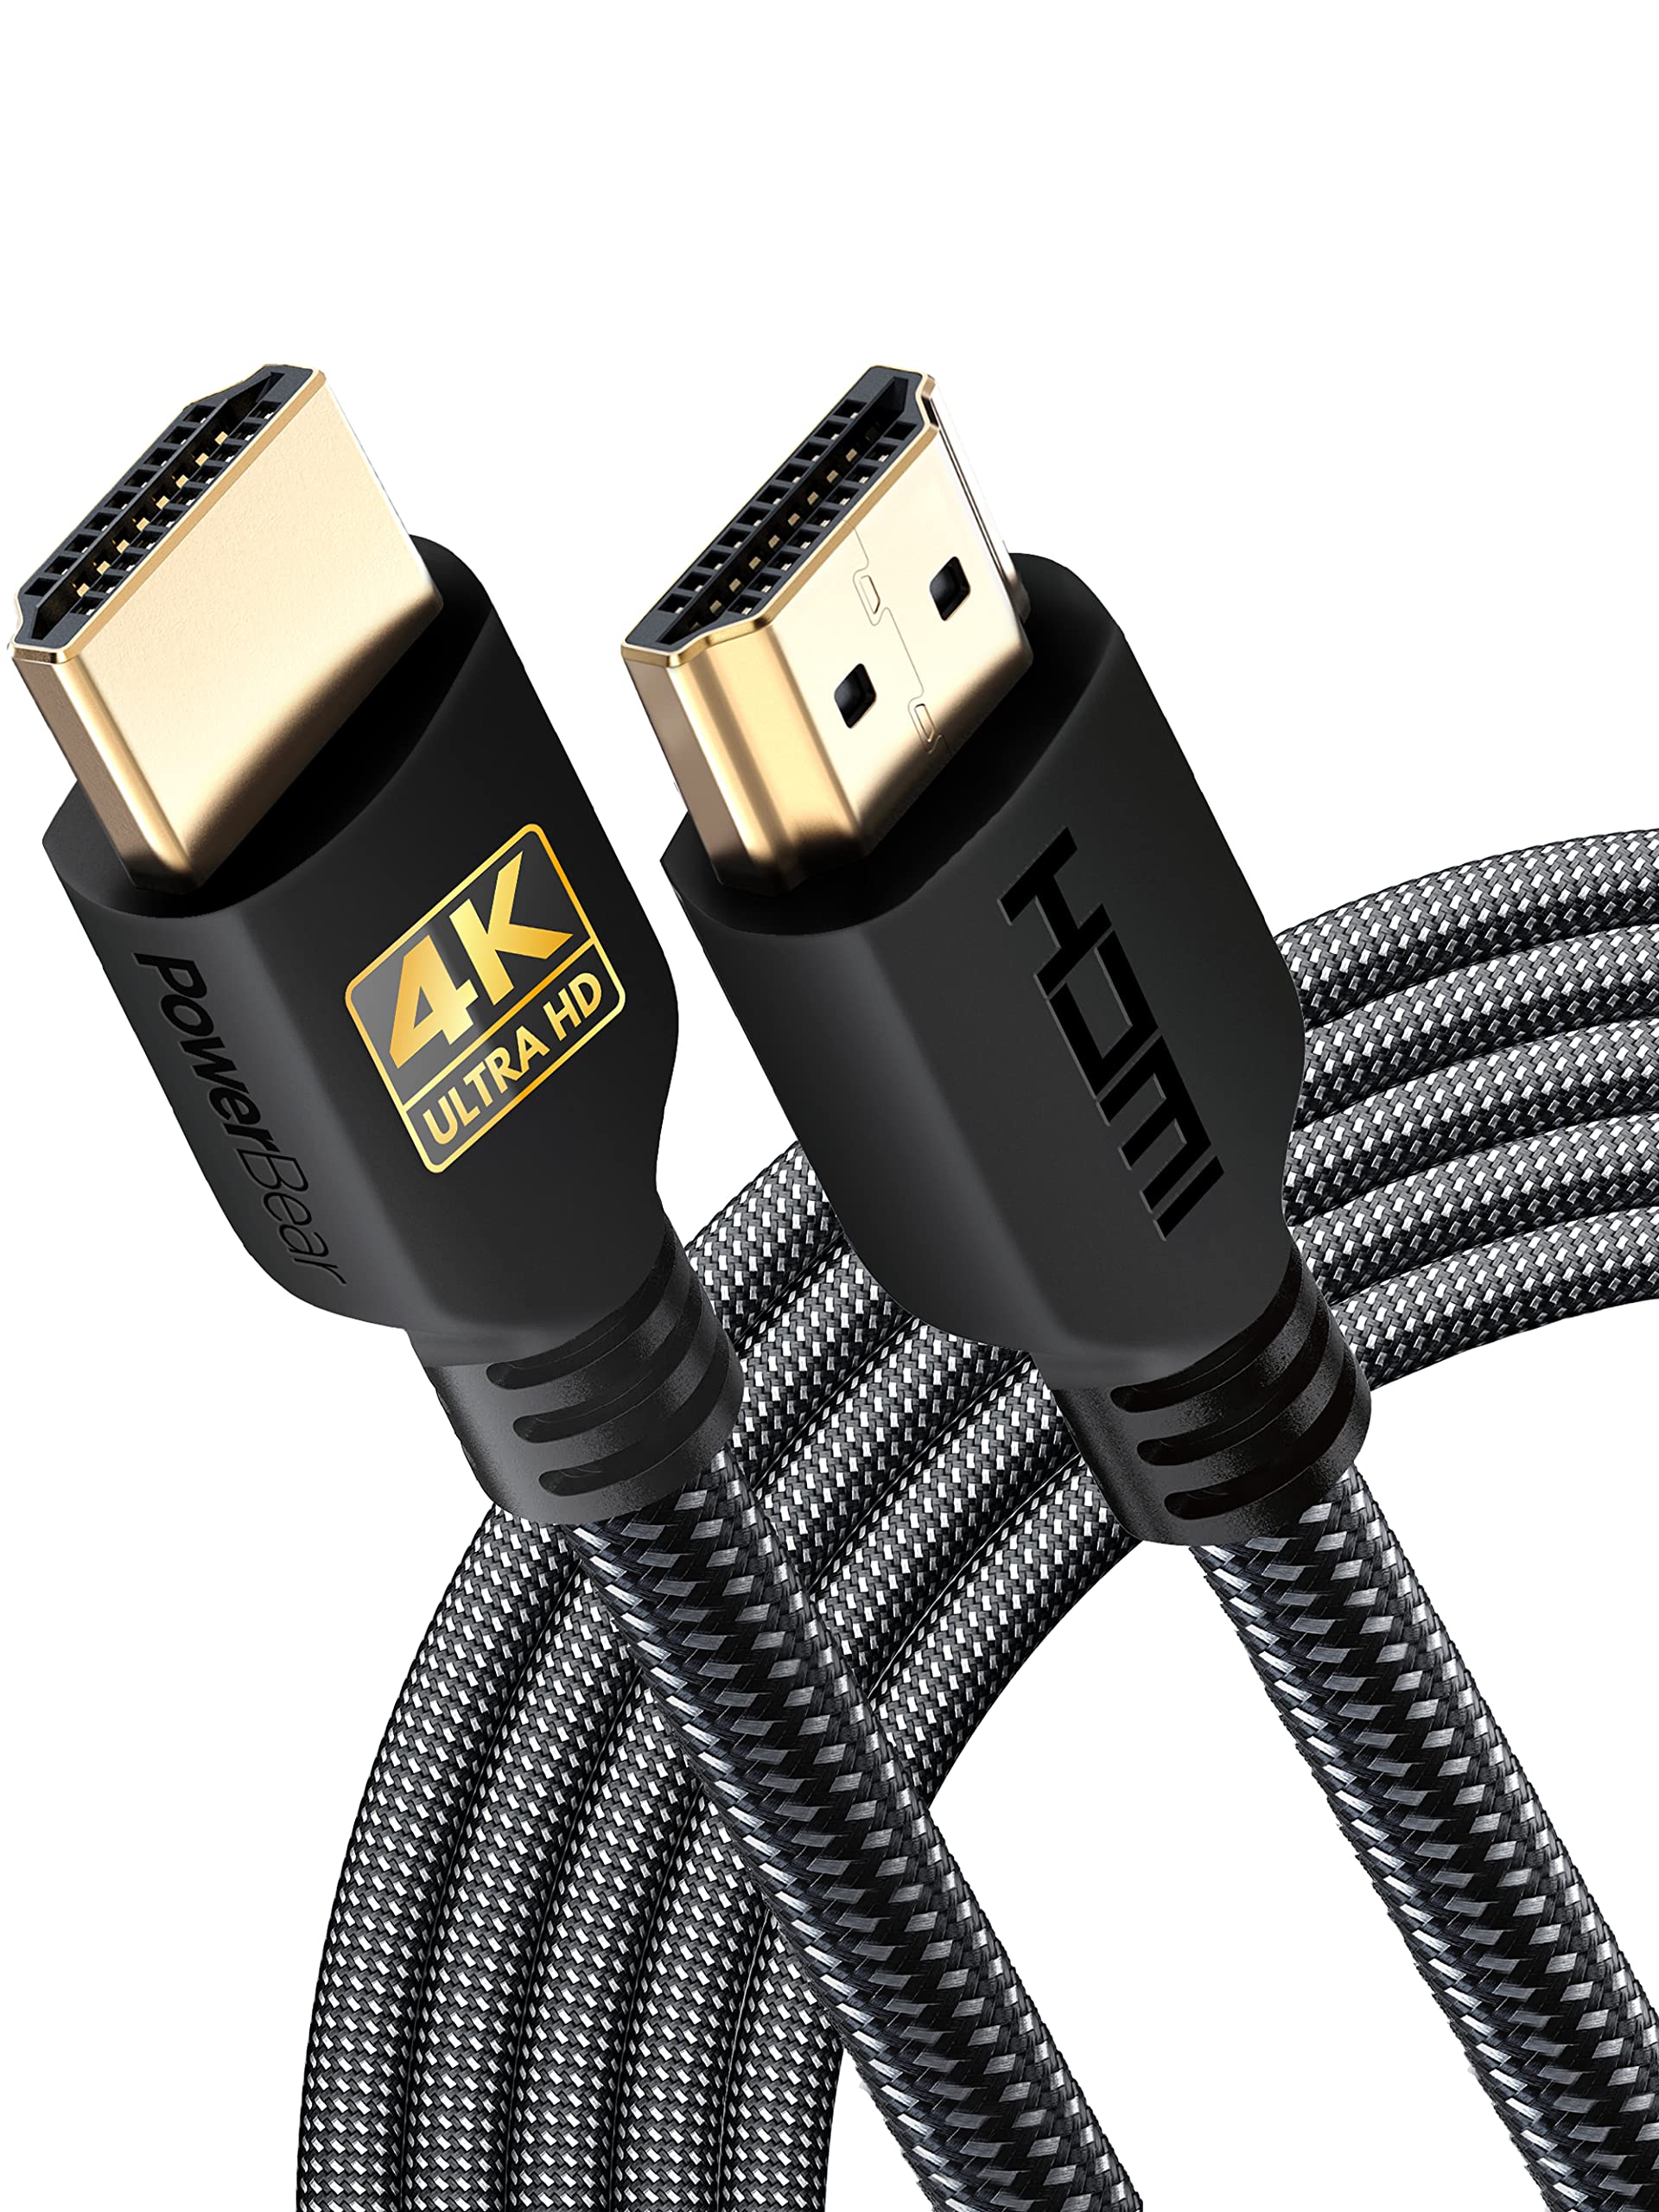 Book Cover PowerBear 4K HDMI Cable 15 ft | High Speed Hdmi Cables, Braided Nylon & Gold Connectors, 4K @ 60Hz, Ultra HD, 2K, 1080P, ARC & CL3 Rated | for Laptop, Monitor, PS5, PS4, Xbox One, Fire TV, & More 1 15 ft